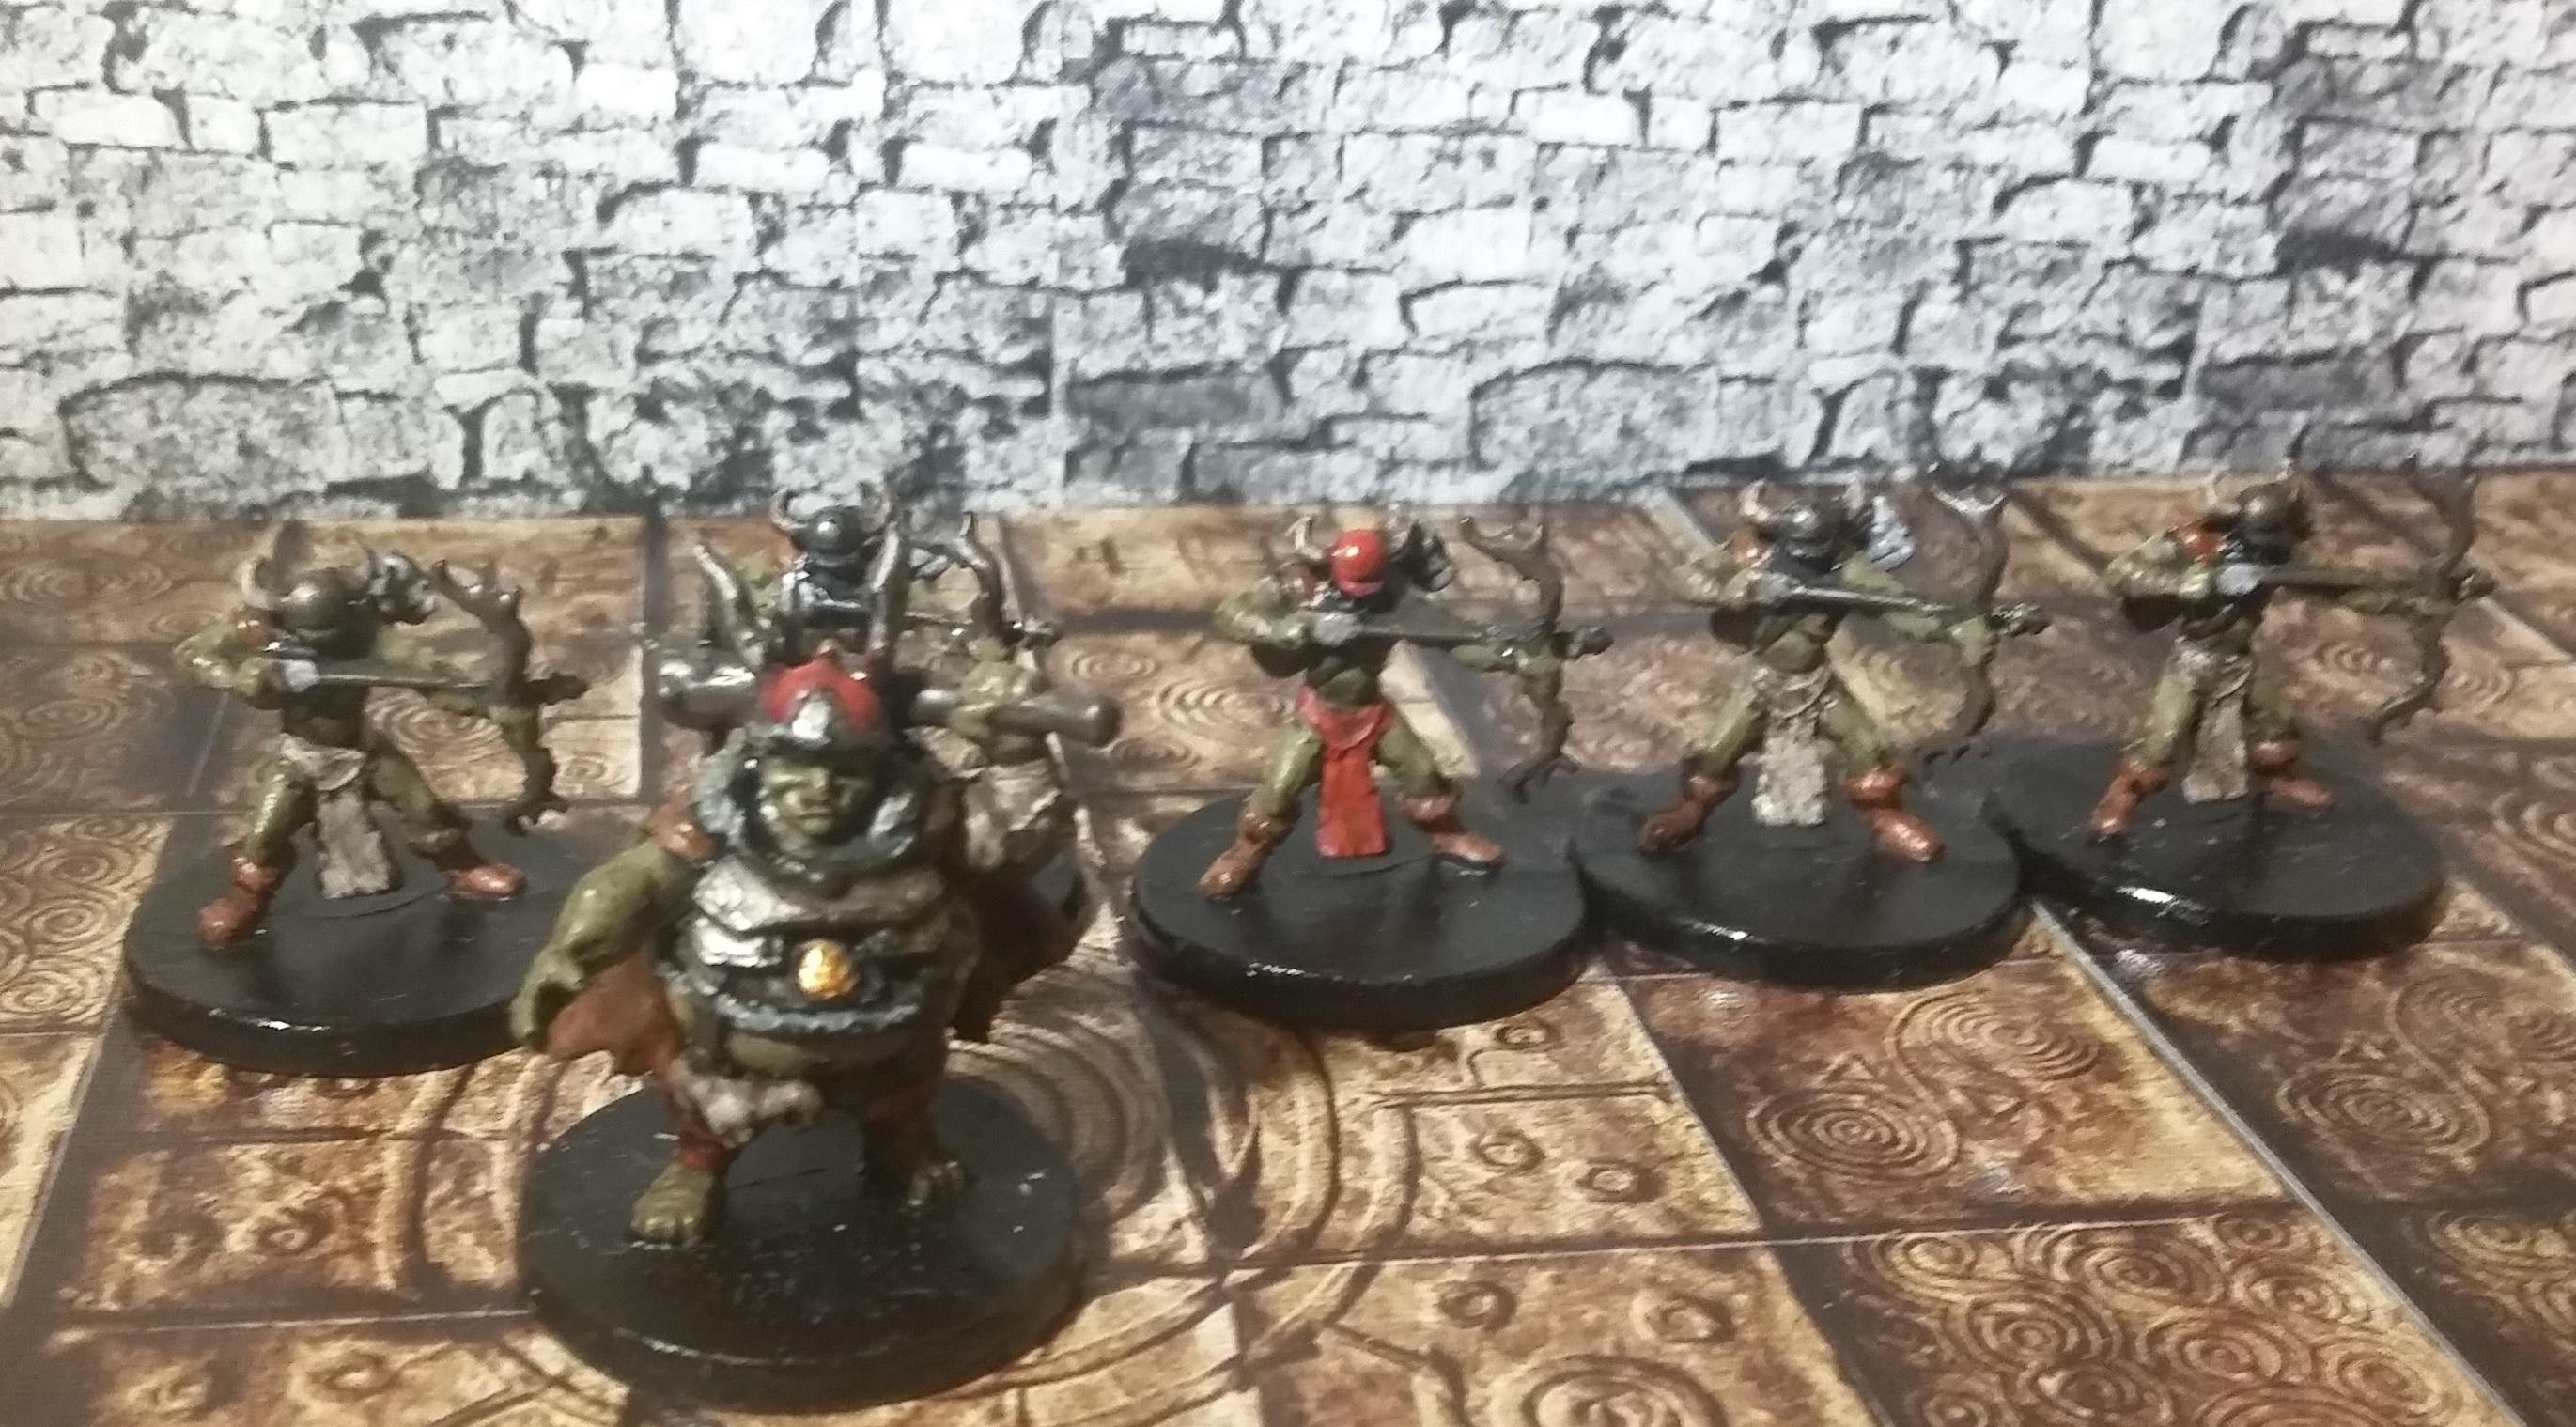 Goblins cropped